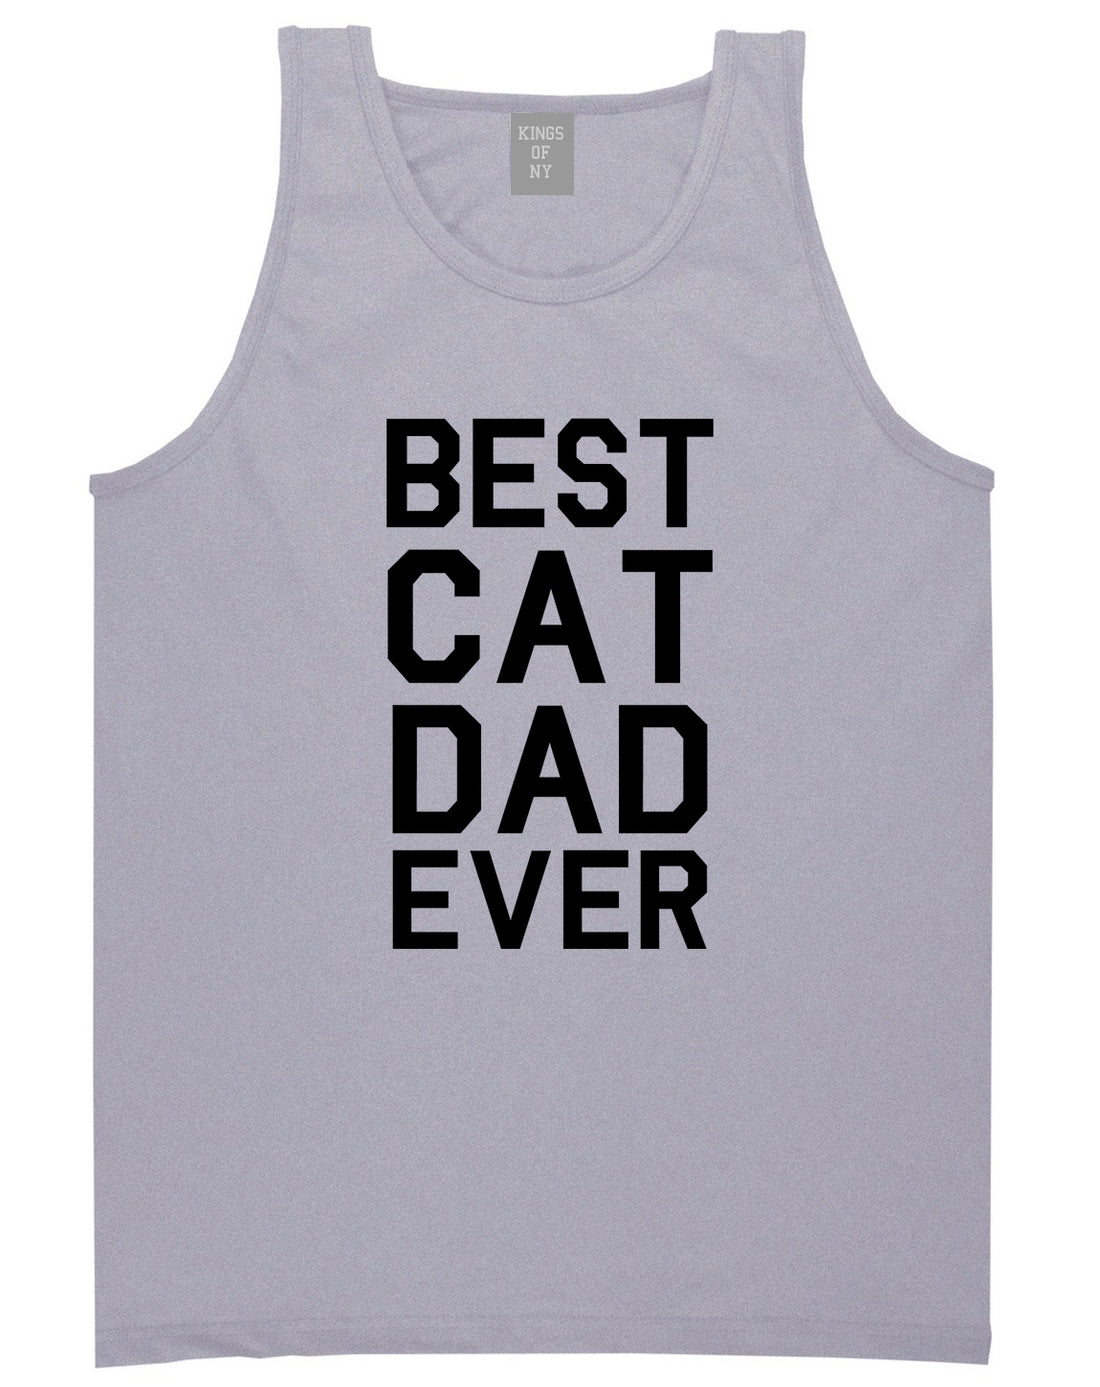 Best_Cat_Dad_Ever Mens Grey Tank Top Shirt by Kings Of NY